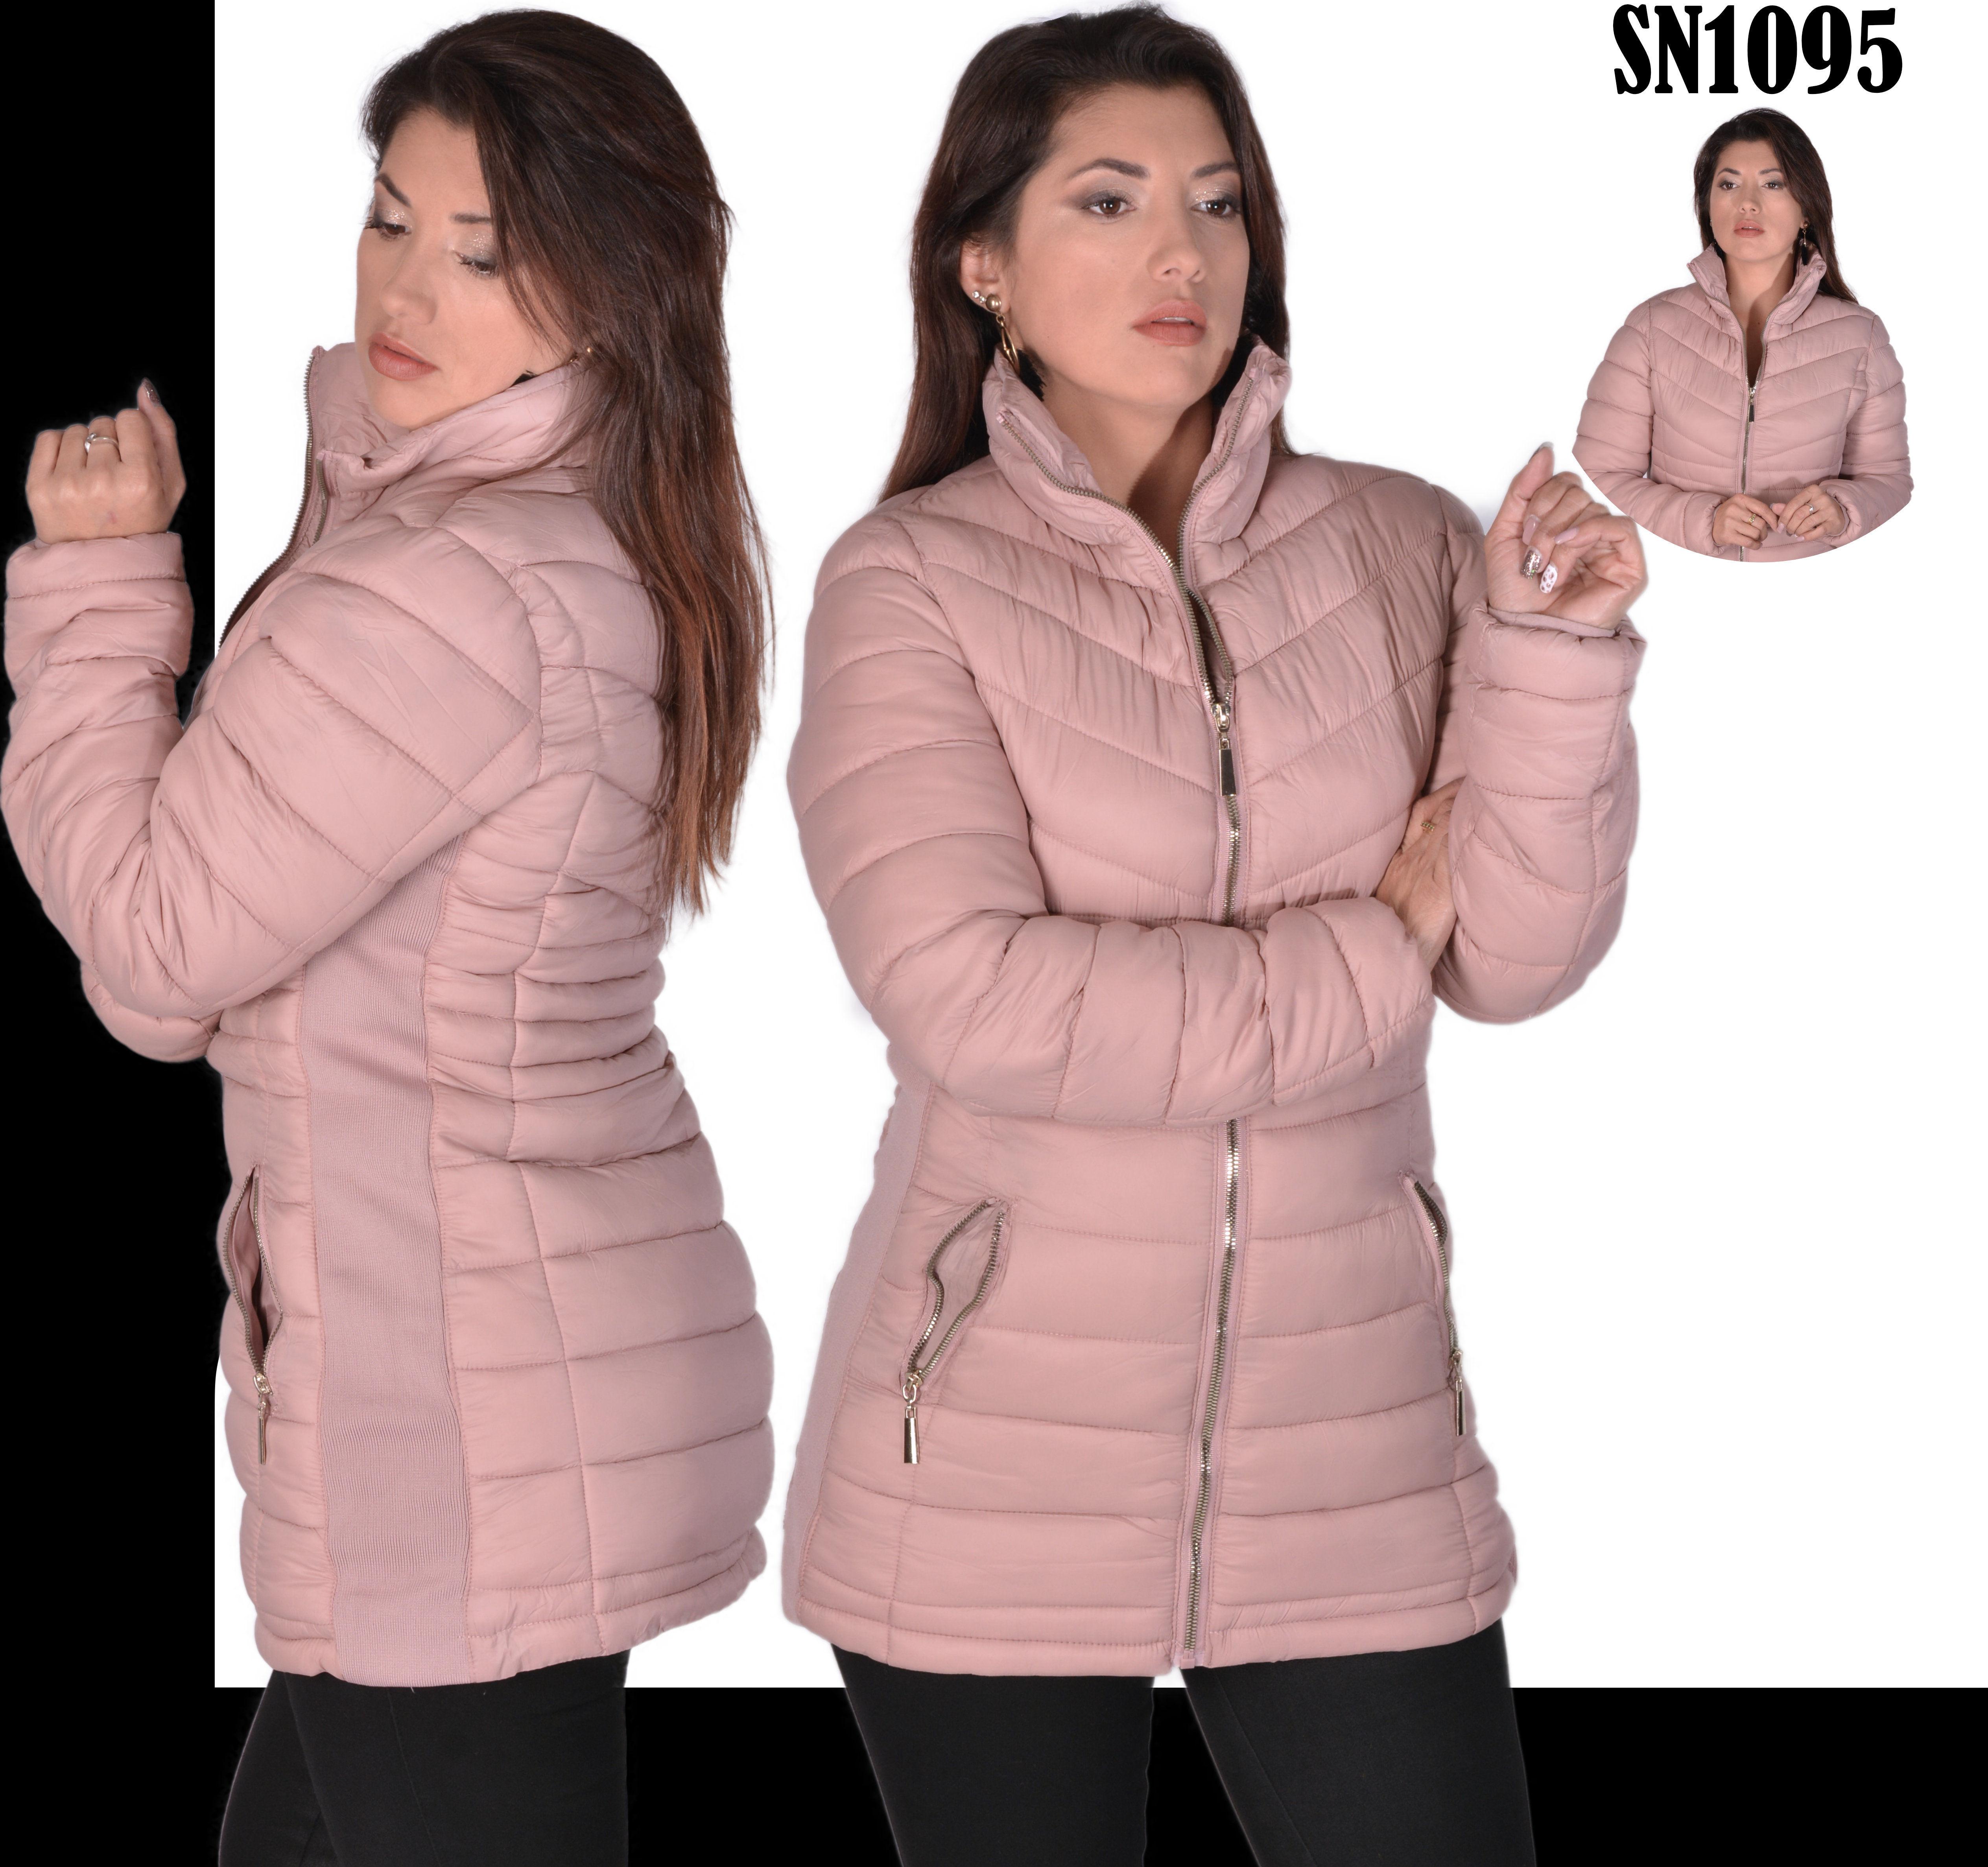 American jacket with high collar and front pockets plus fashion style Color Pink